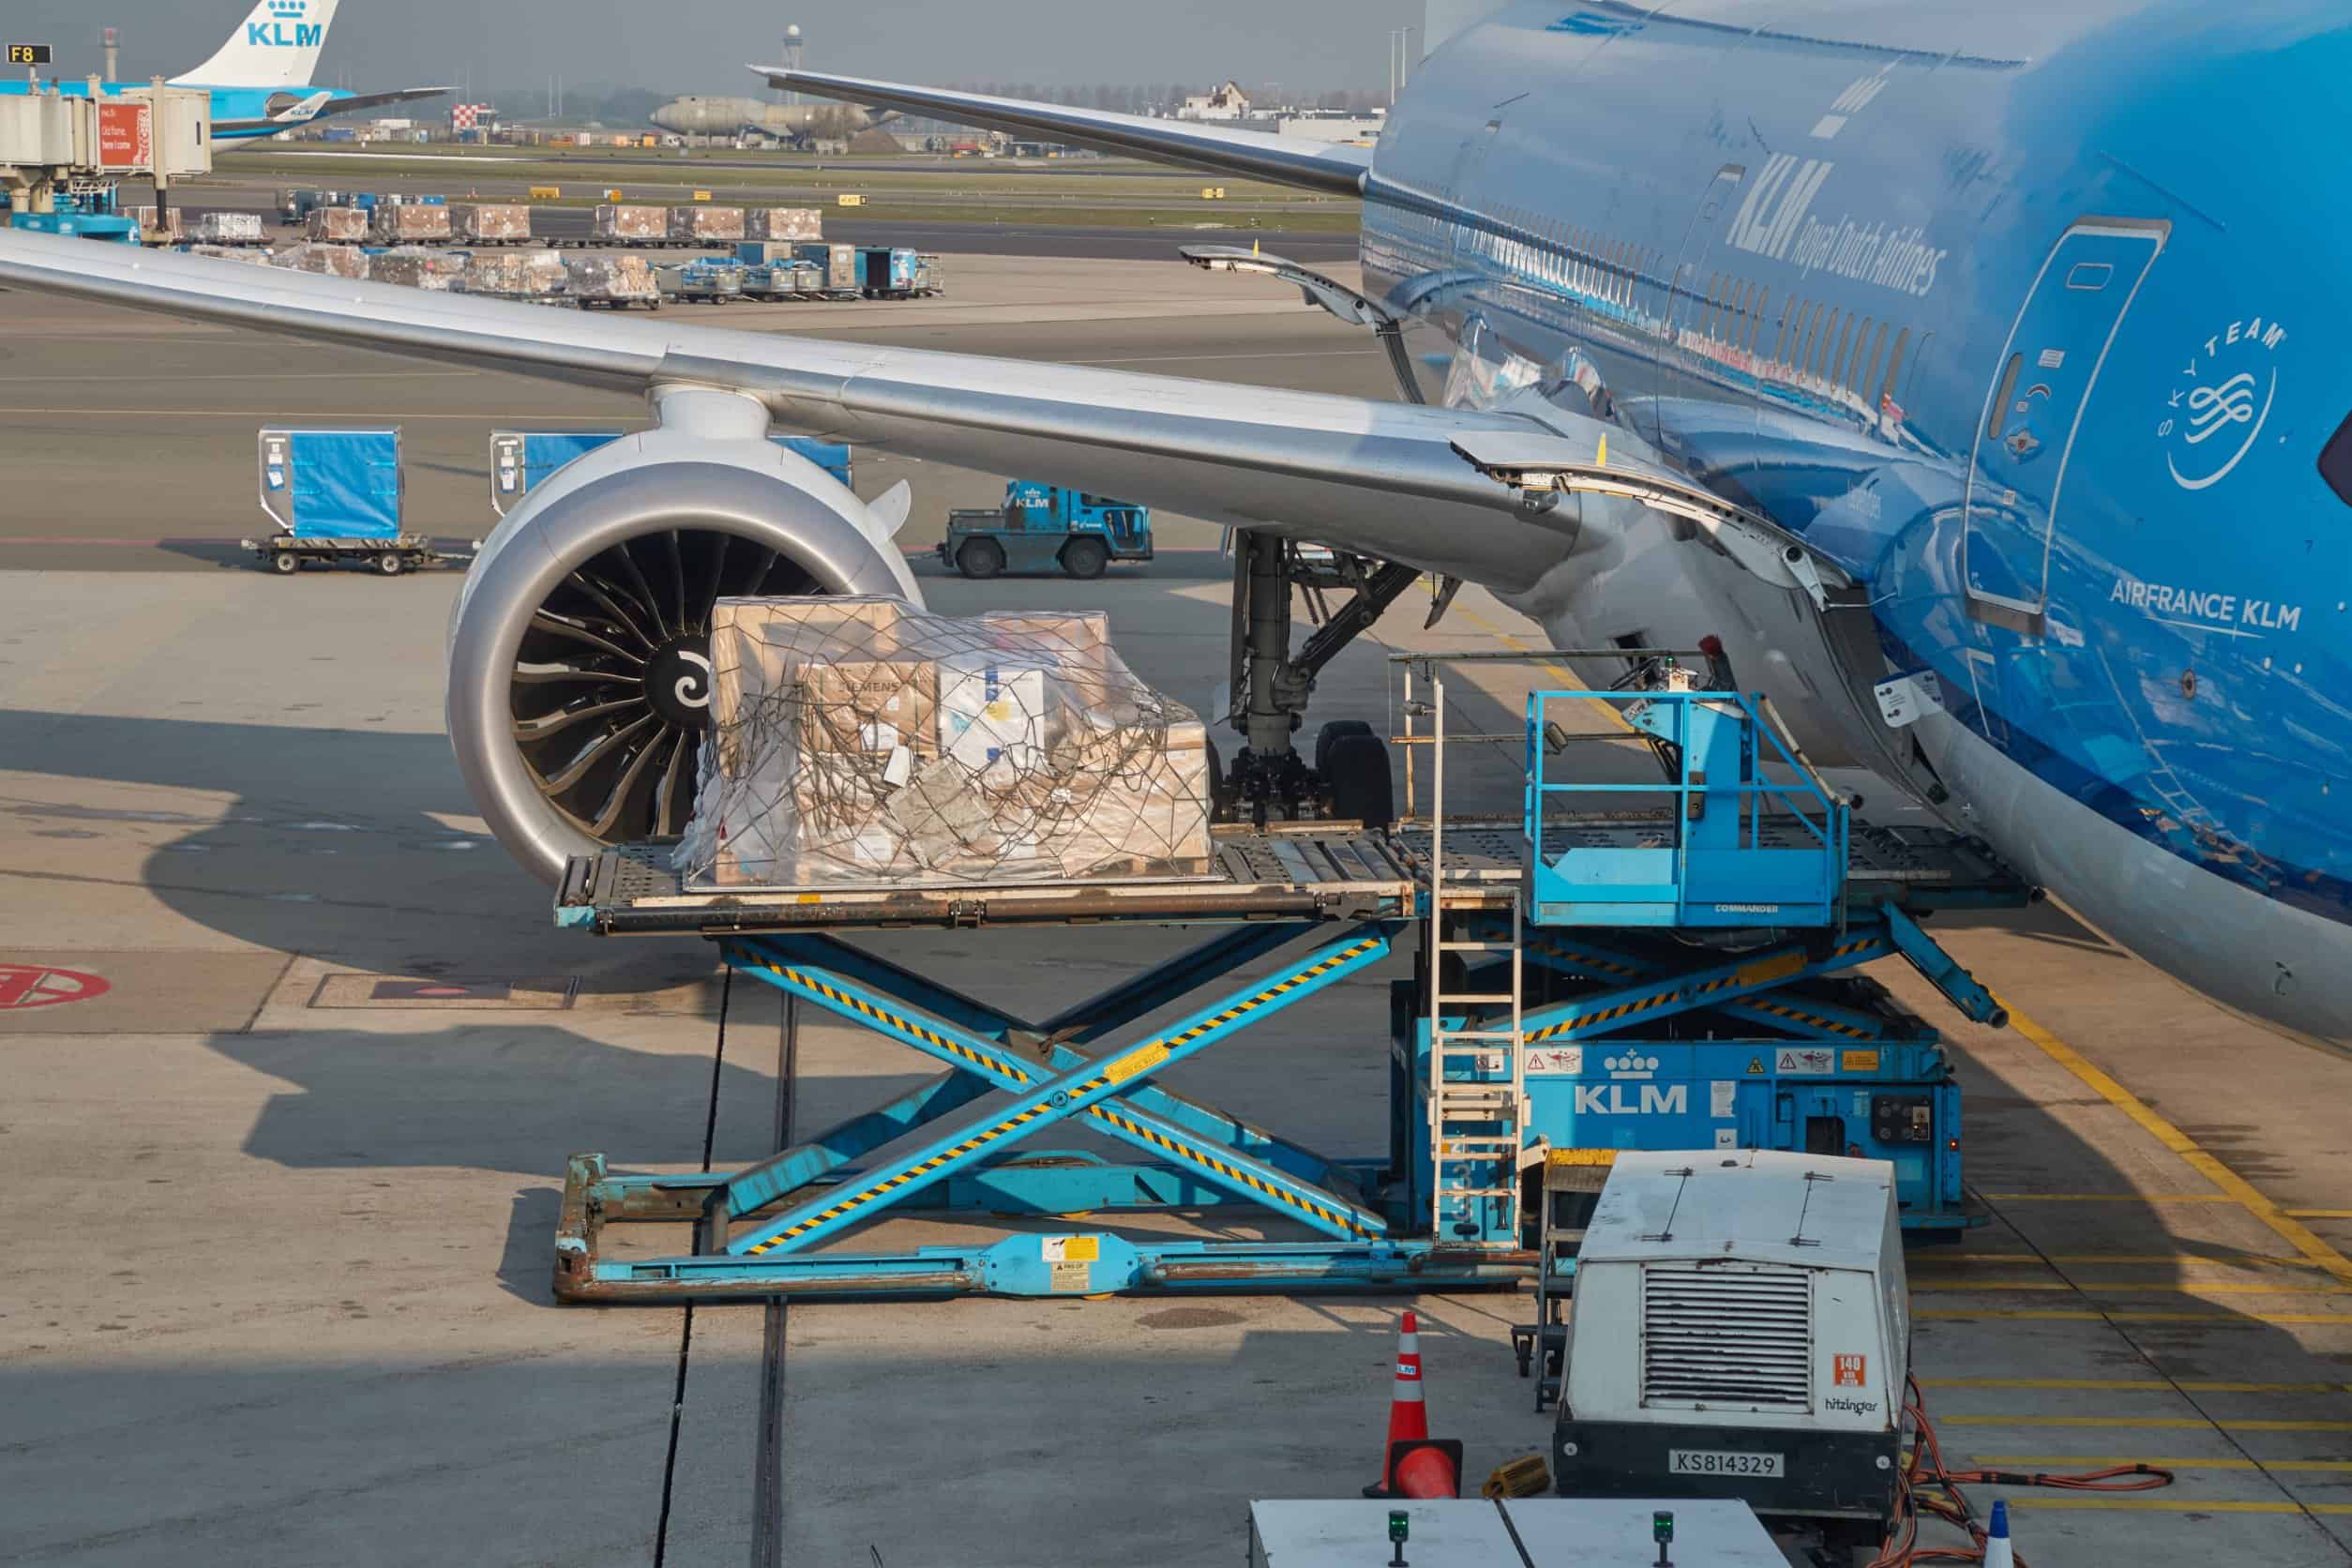 Cargo being loaded onto a KLM passenger plane at the airport.